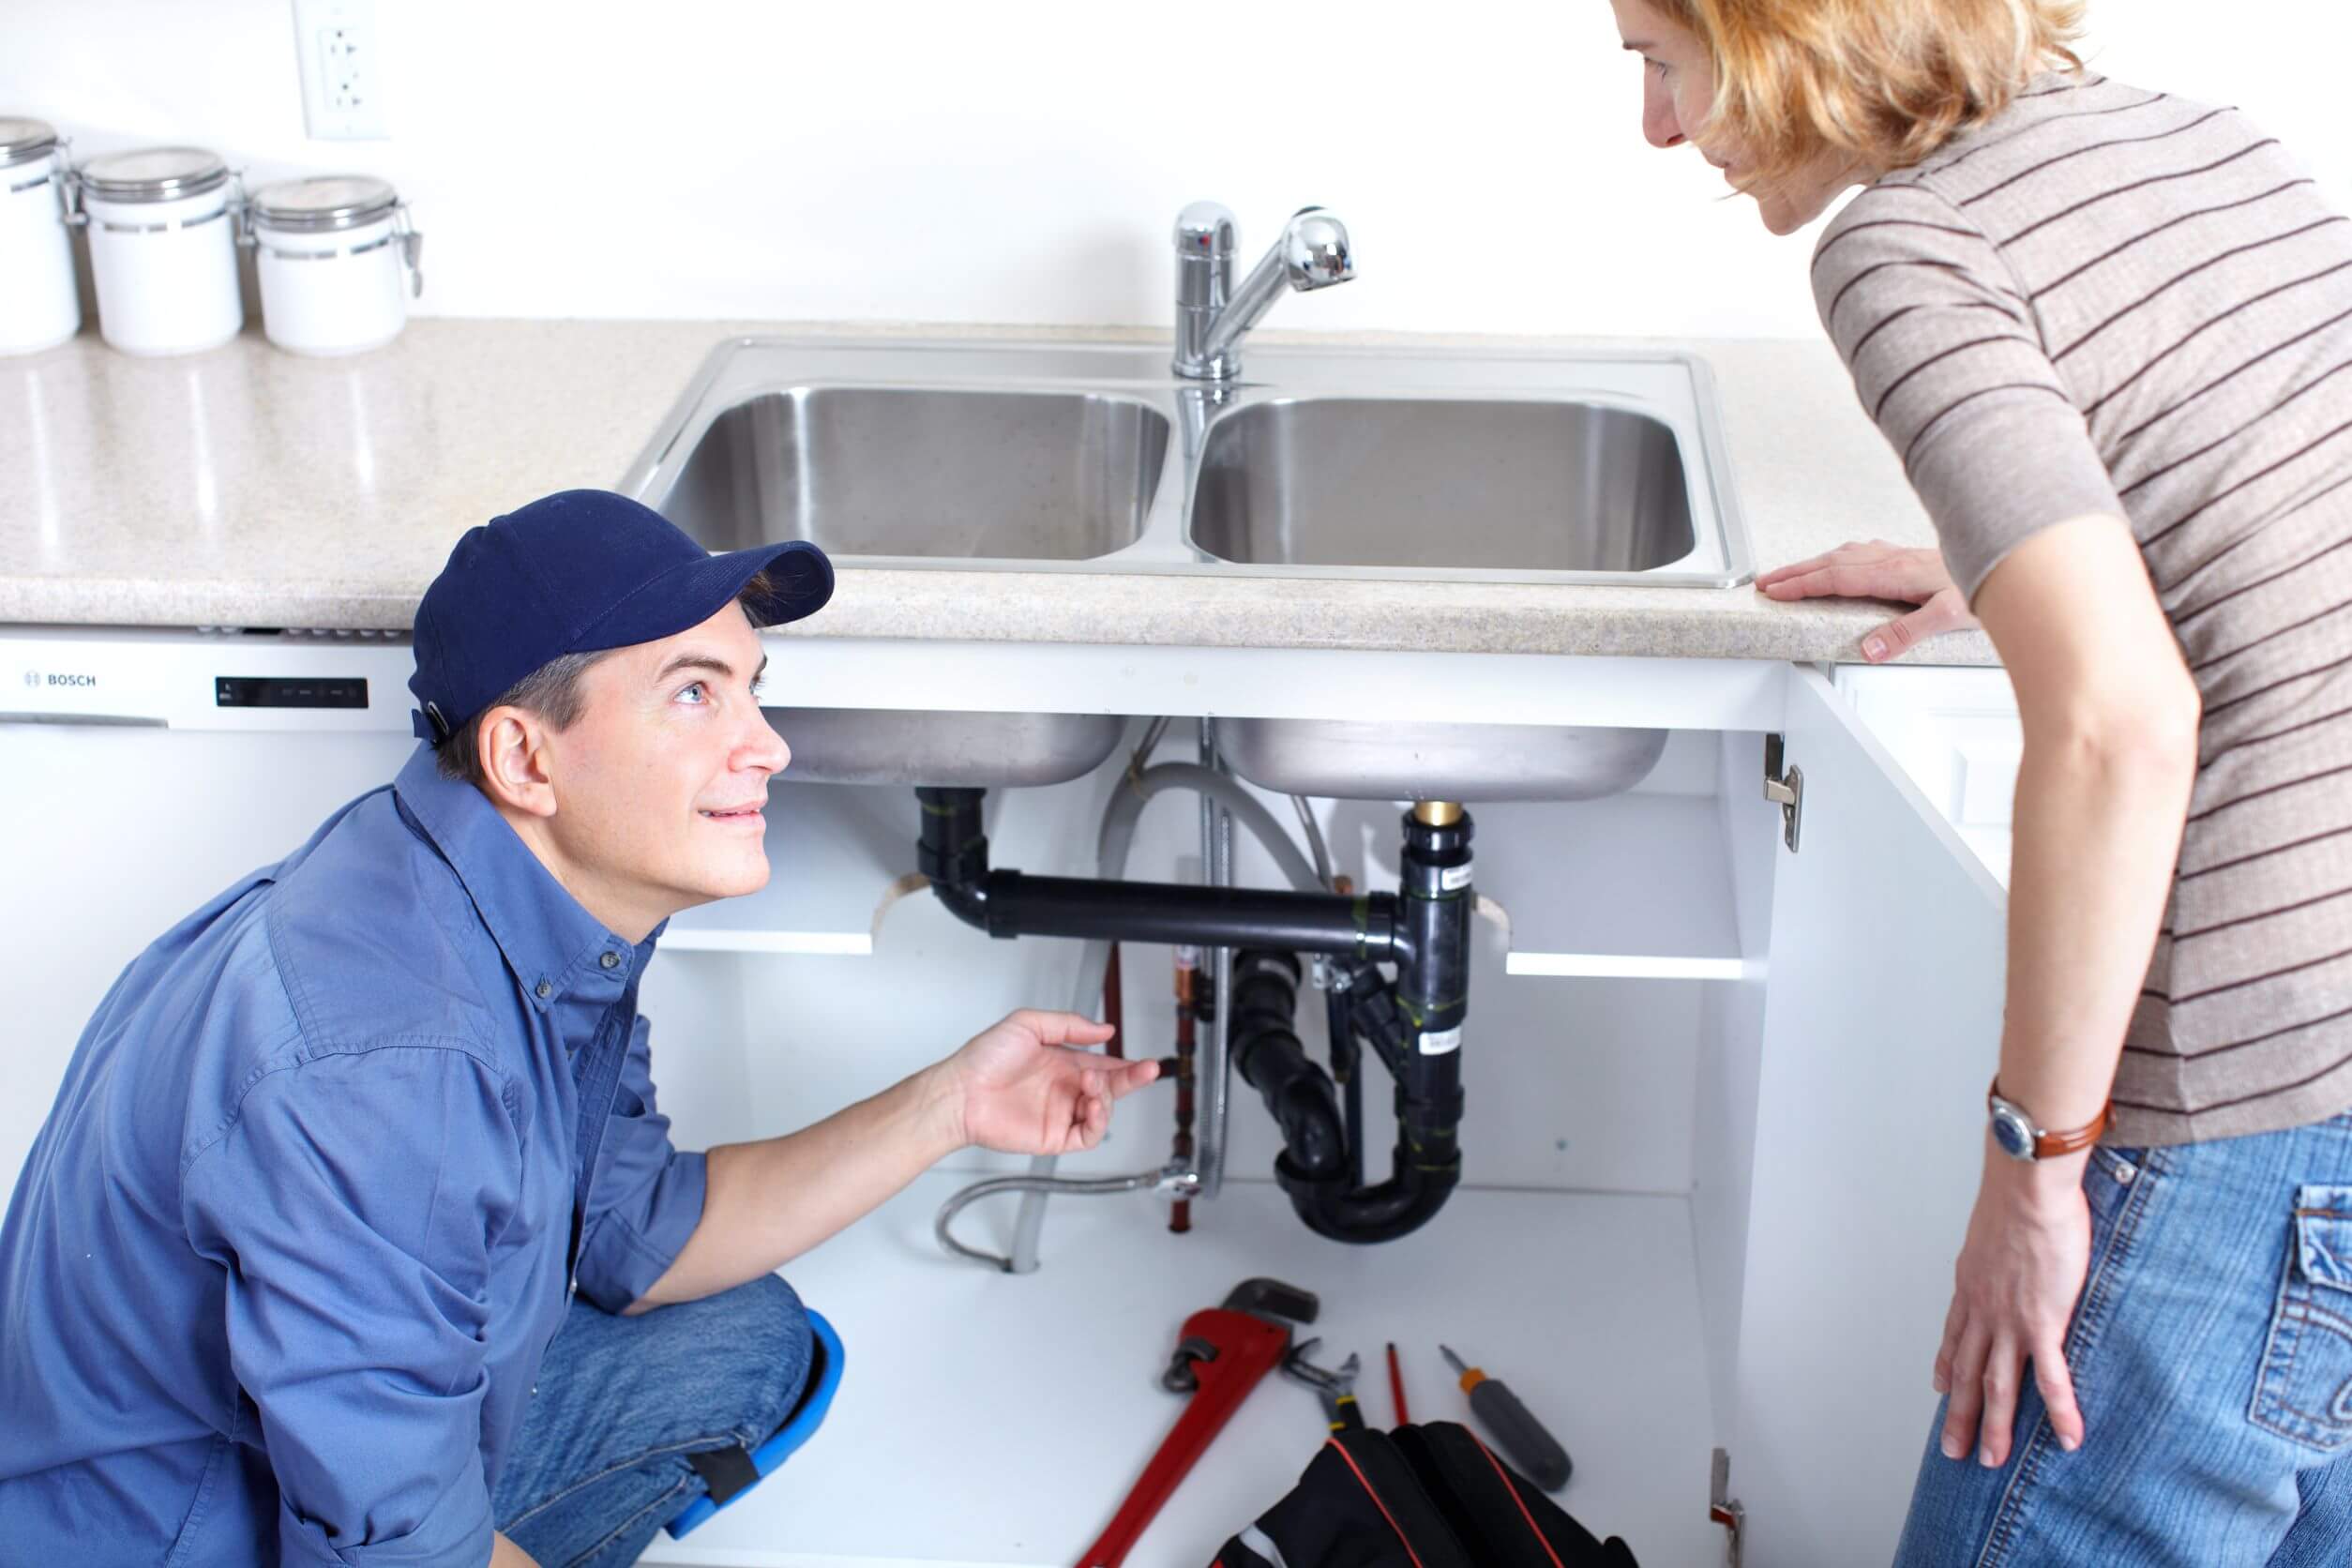 Things to Keep in Mind When Hiring 24 Hour Plumbers in Melbourne